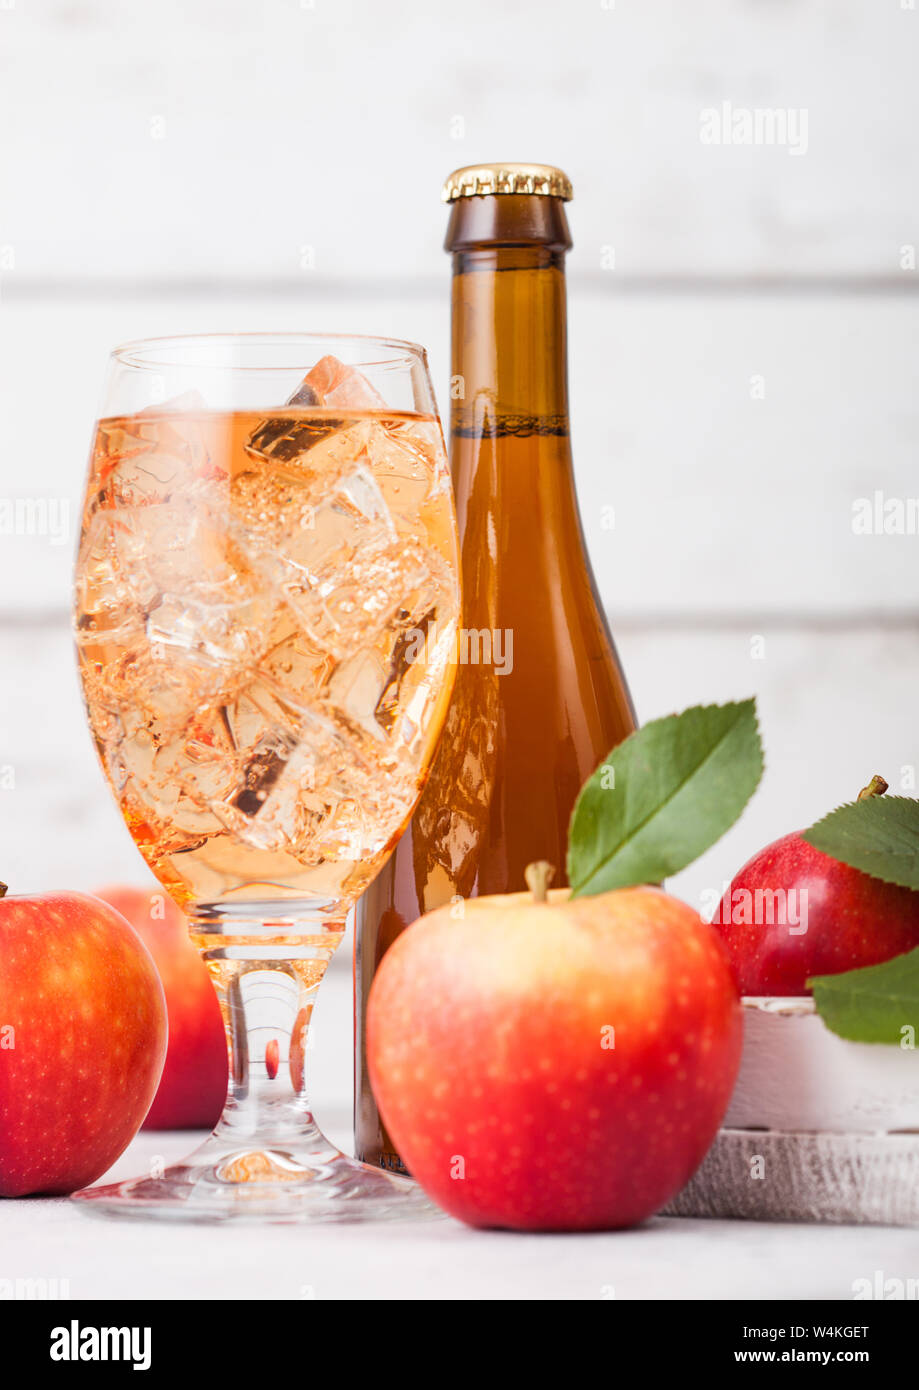 Bottle and glass of homemade organic apple cider with fresh apples in box on wooden background, Glass with ice cubes Stock Photo